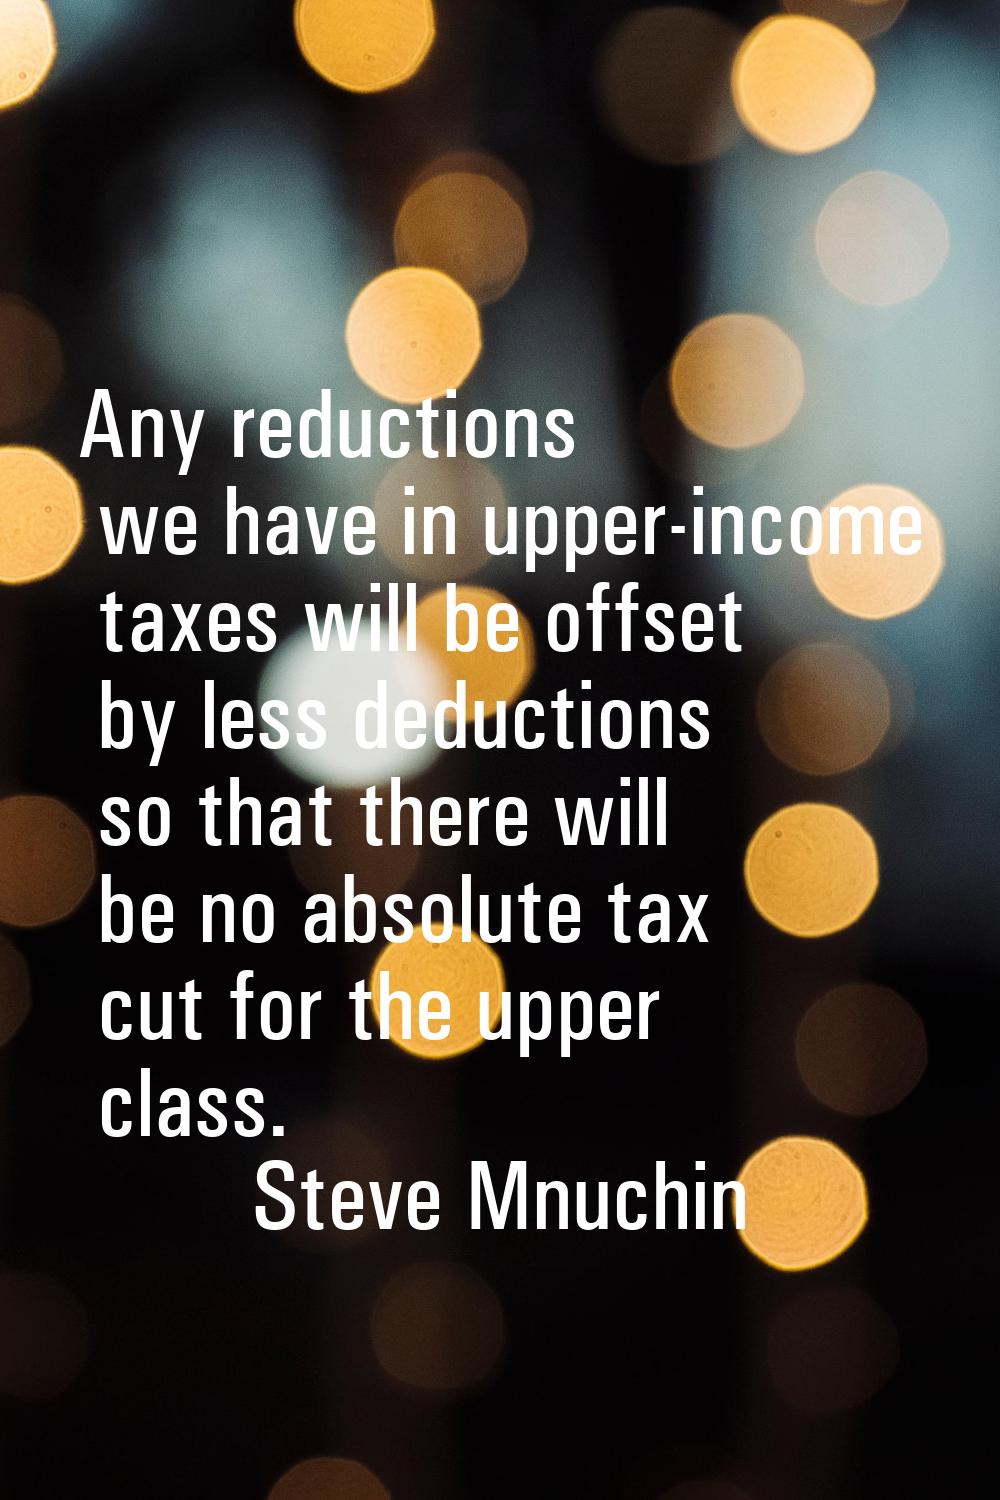 Any reductions we have in upper-income taxes will be offset by less deductions so that there will b